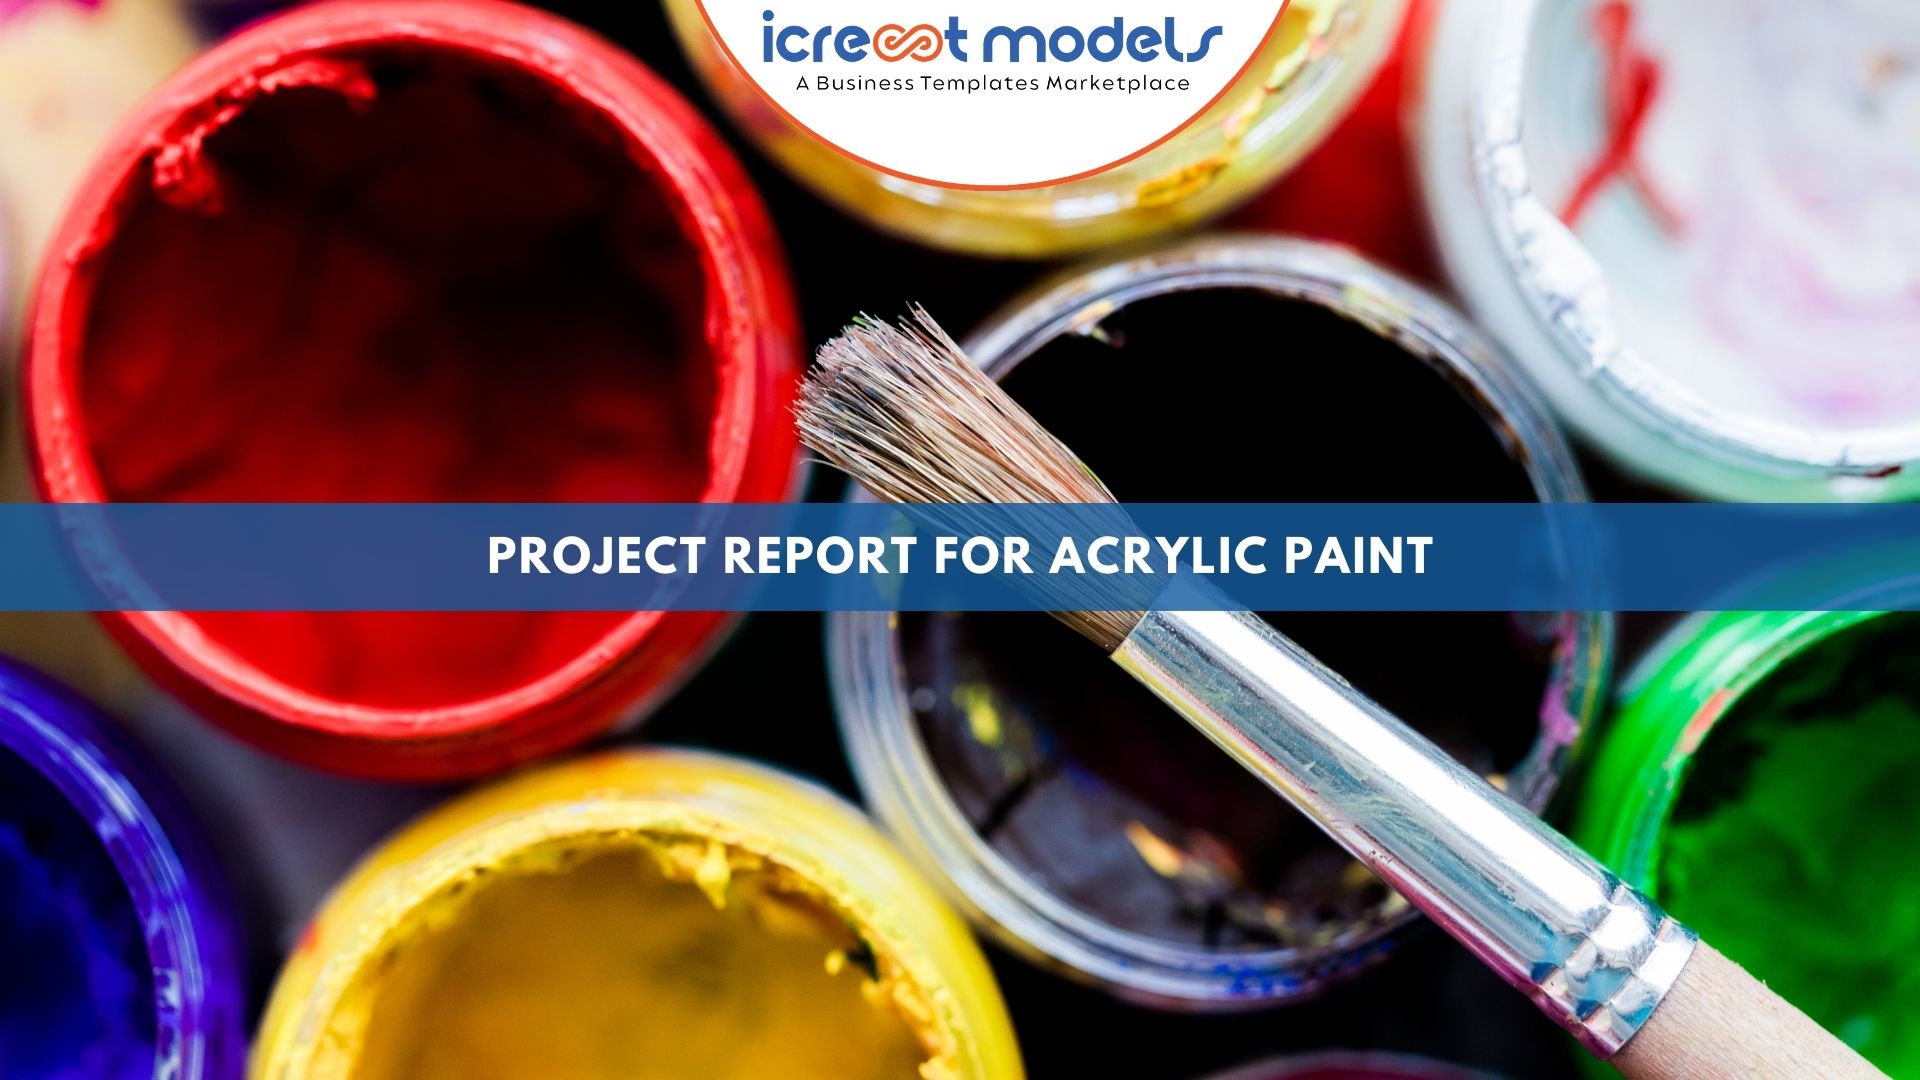 PROJECT REPORT FOR ACRYLIC PAINT